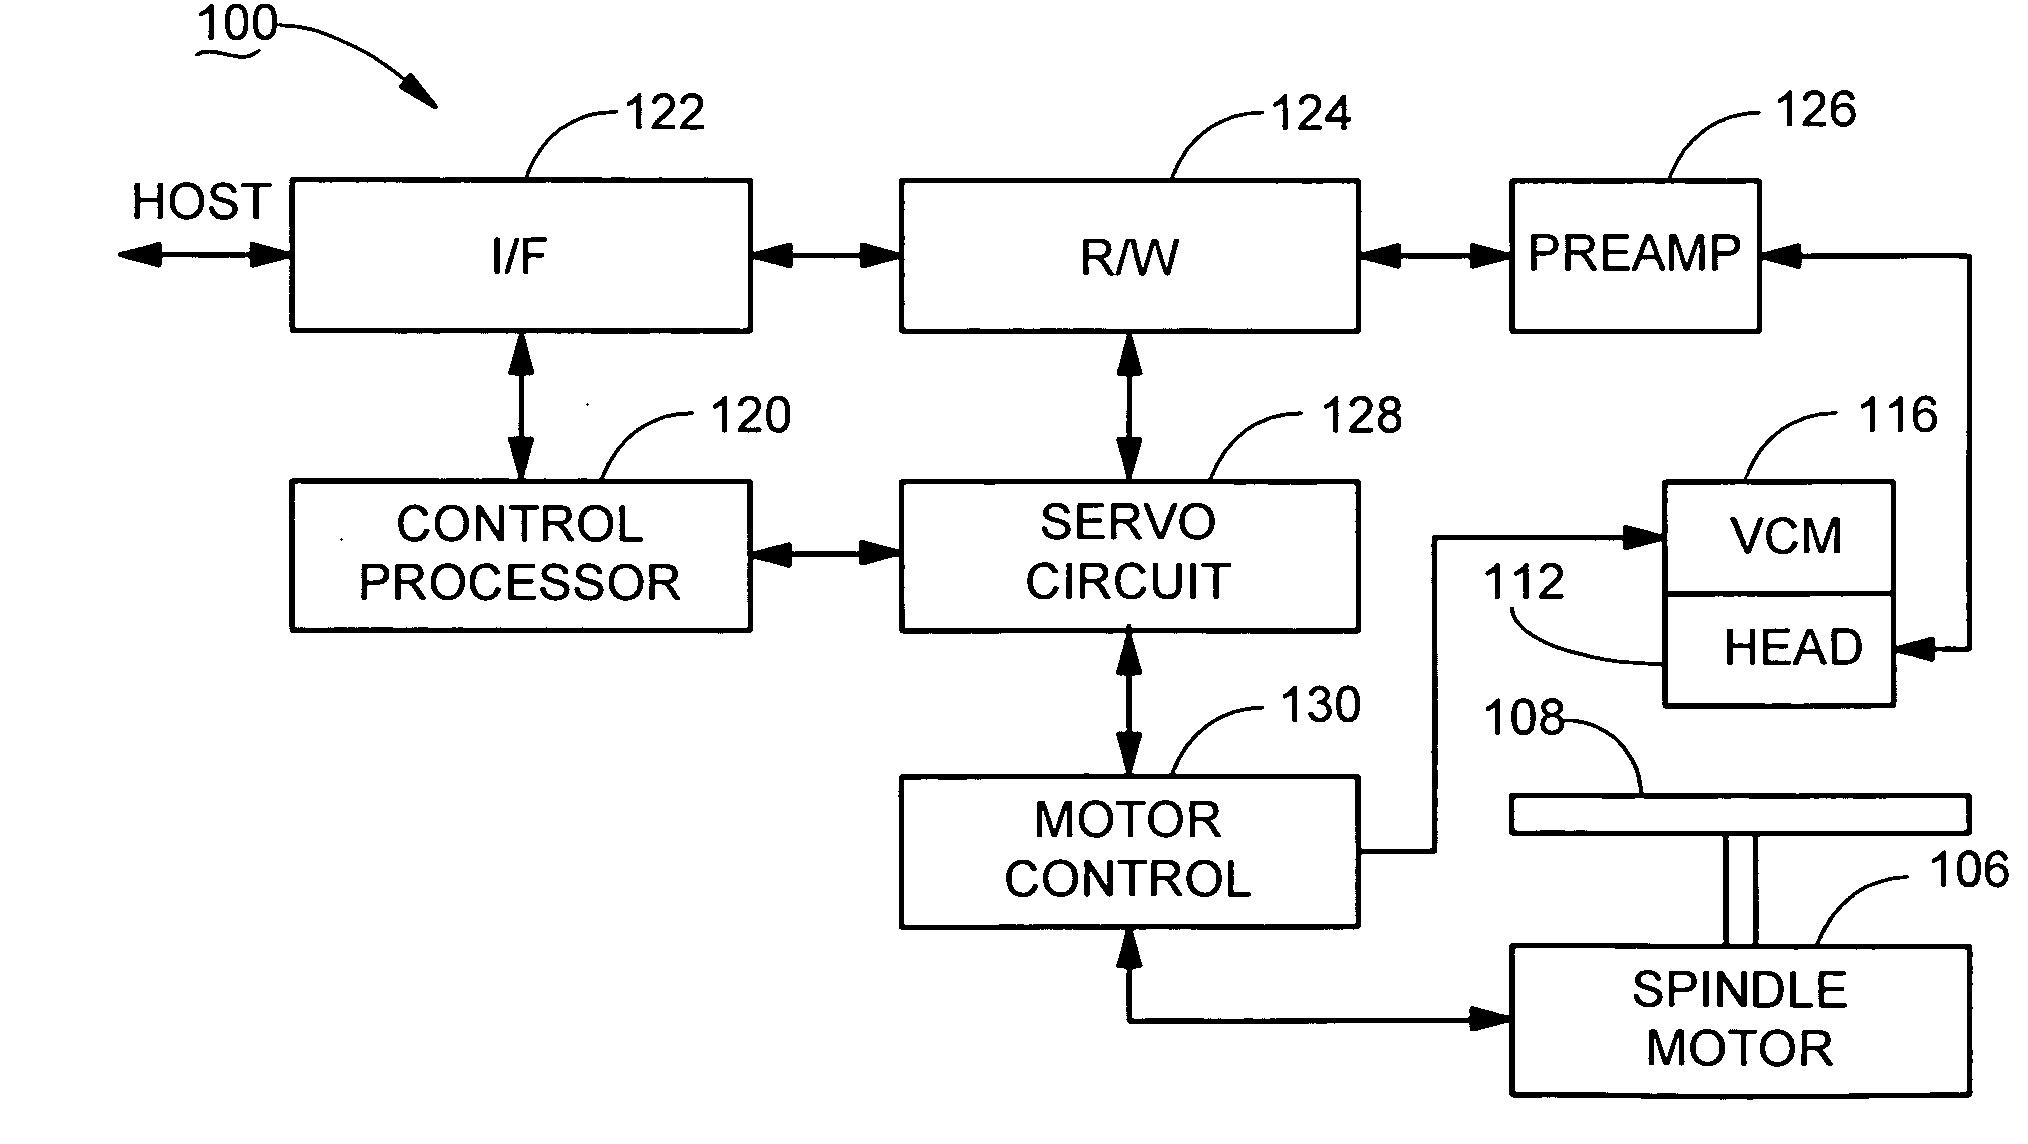 Closed-loop rotational control of a brushless dc motor